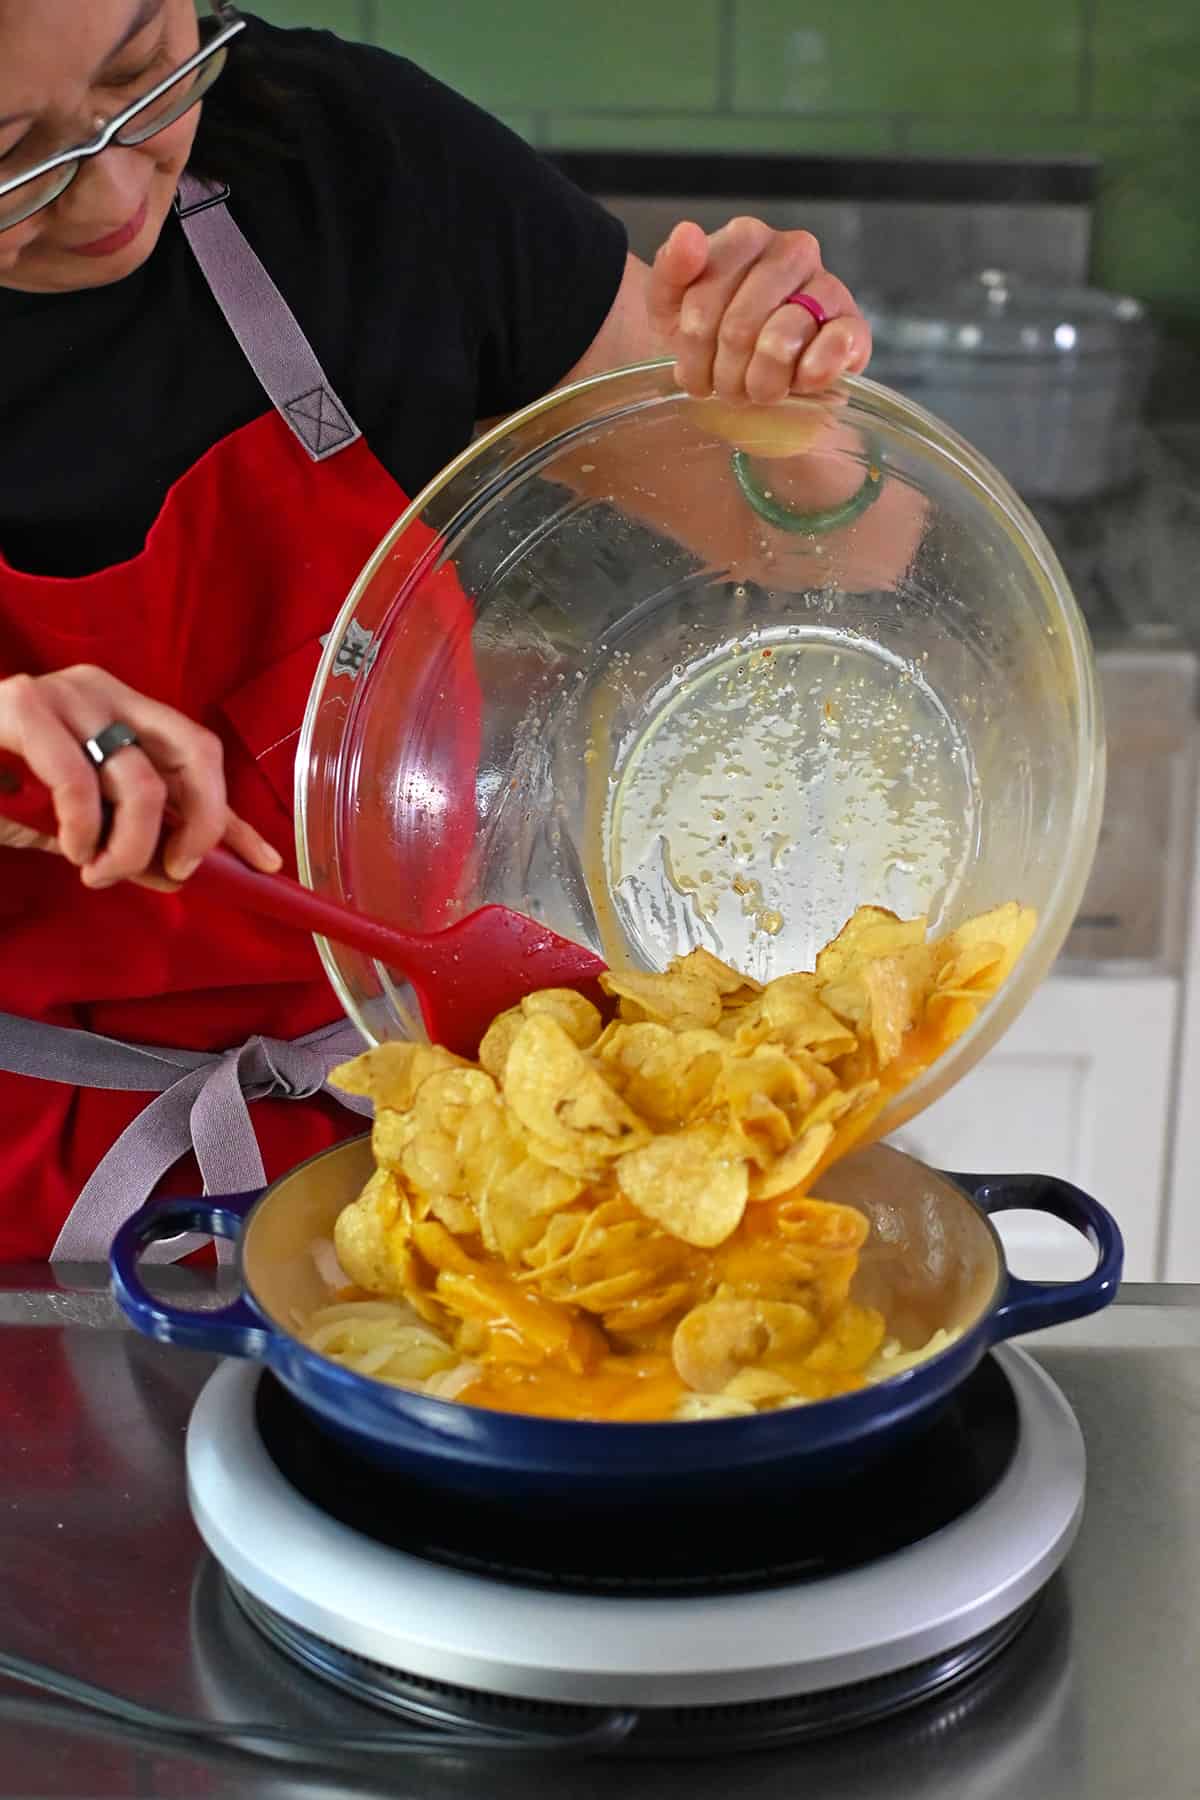 An Asian woman in glasses is adding a bowl of whisked eggs and potato chips to a blue skillet with sautéed onions to make a quick Spanish tortilla.